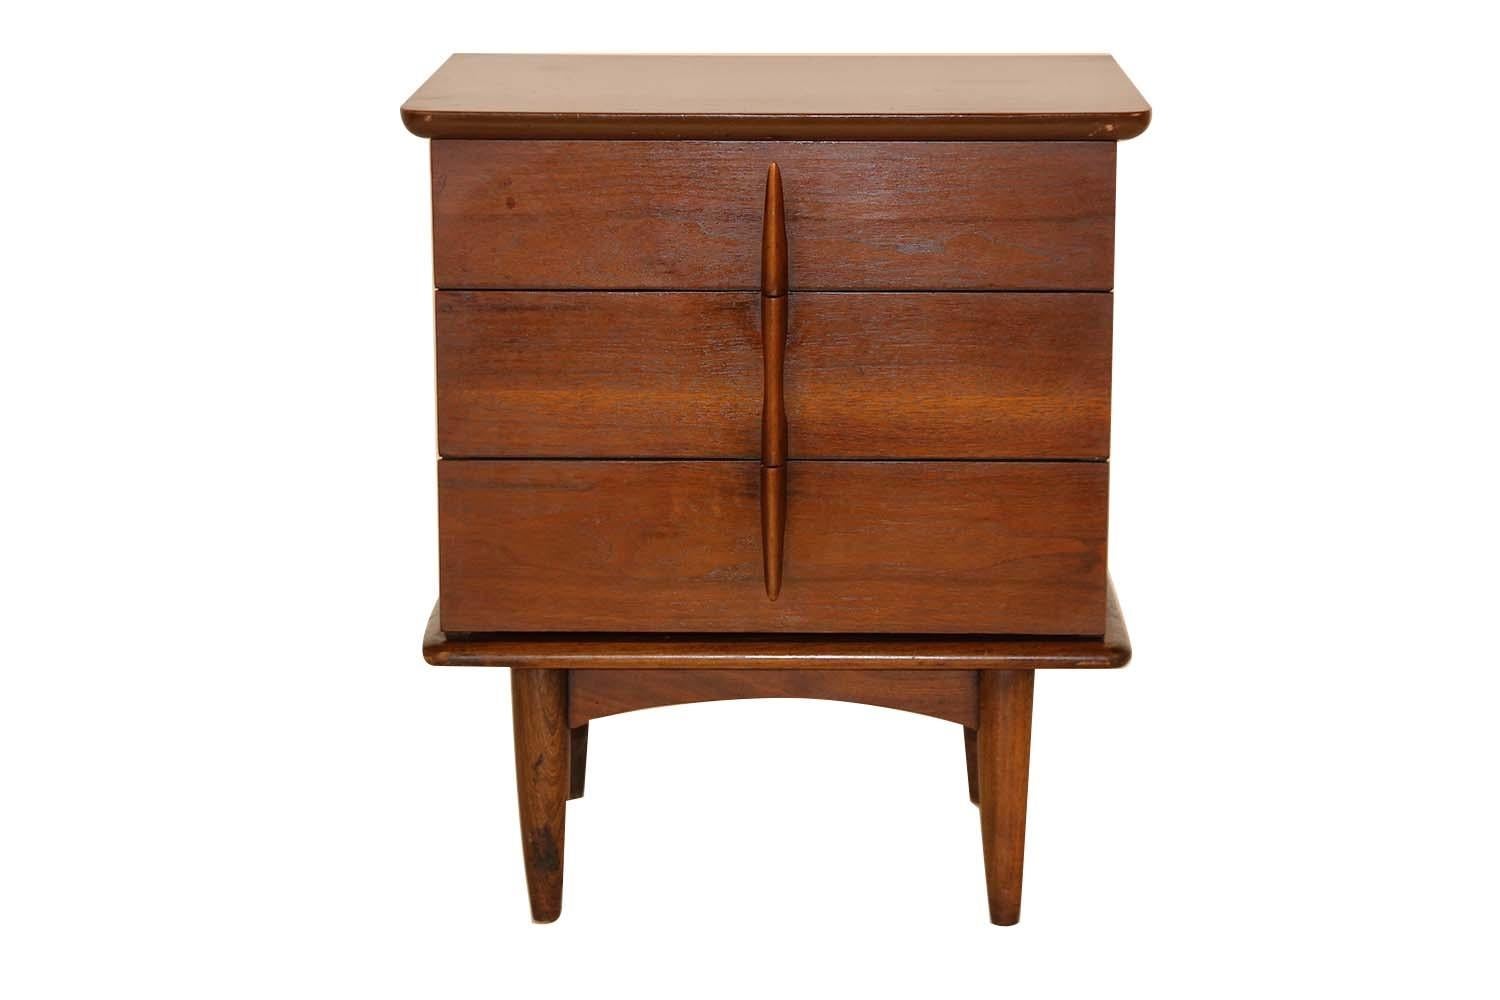 A remarkable midcentury nightstand/side table by United in nearly pristine condition. Exceptional construction and style, features three dove tailed spacious drawers accented with beautiful sculpted pulls. The nightstand rest over tapered legs. This